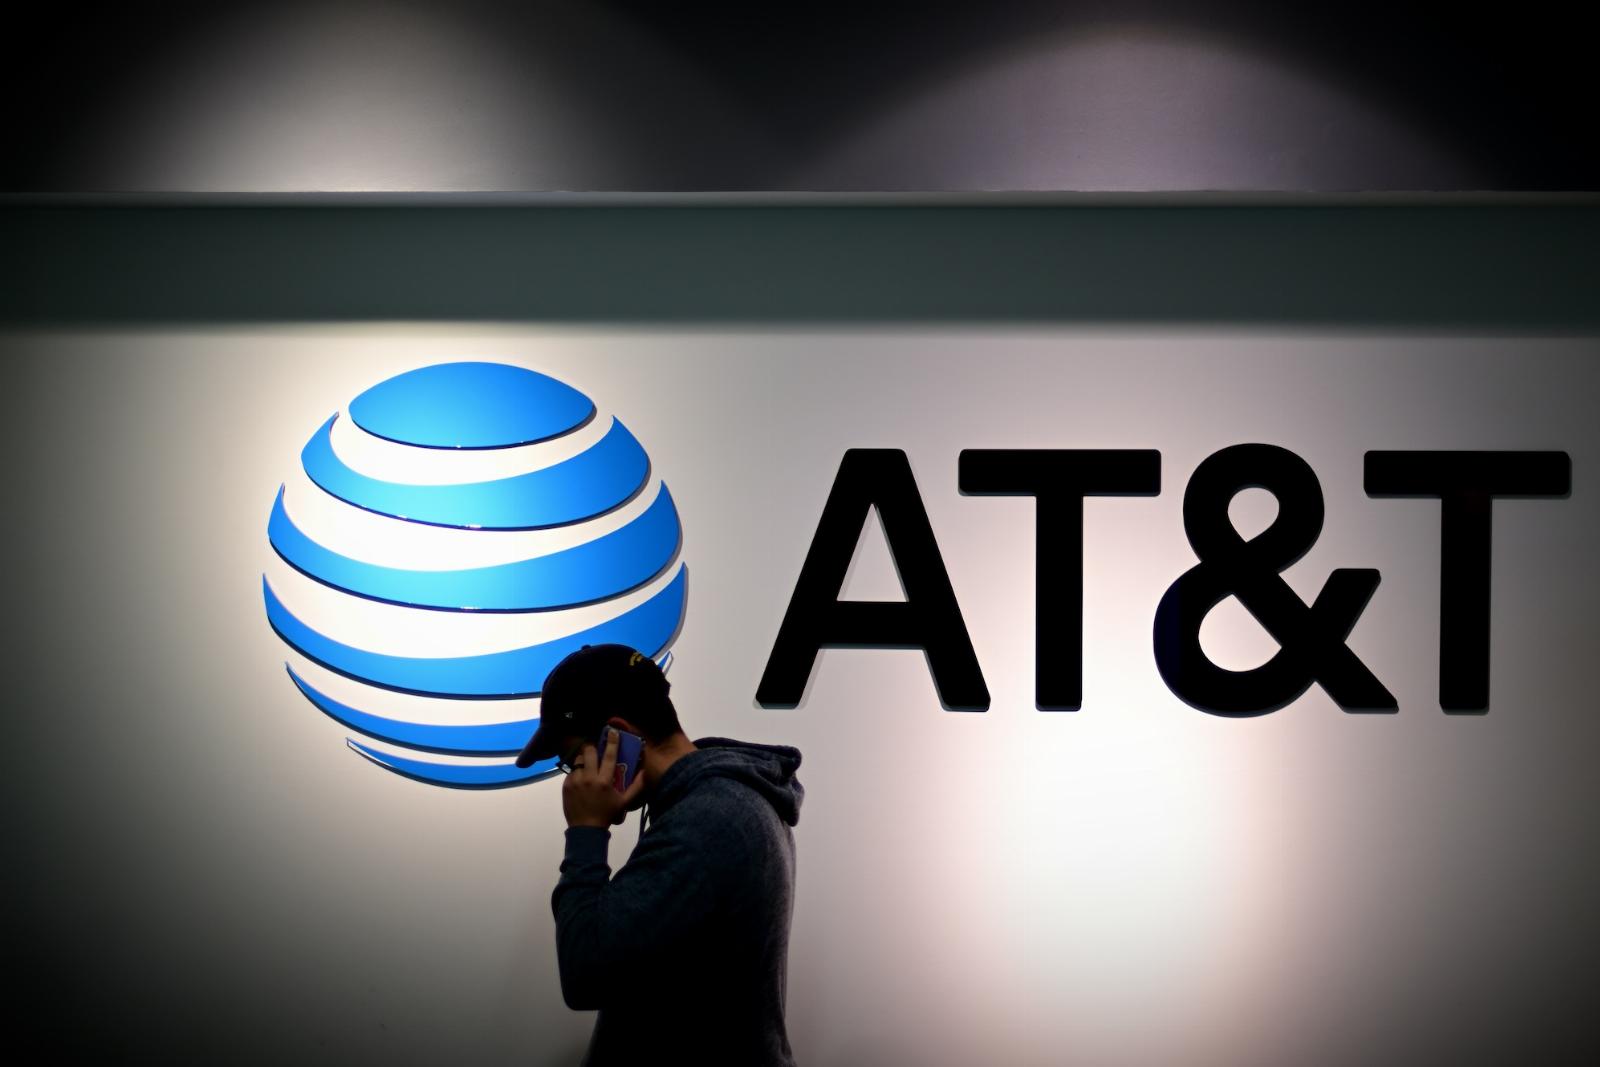 AT&T says criminals stole phone records of ‘nearly all’ customers in new data breach